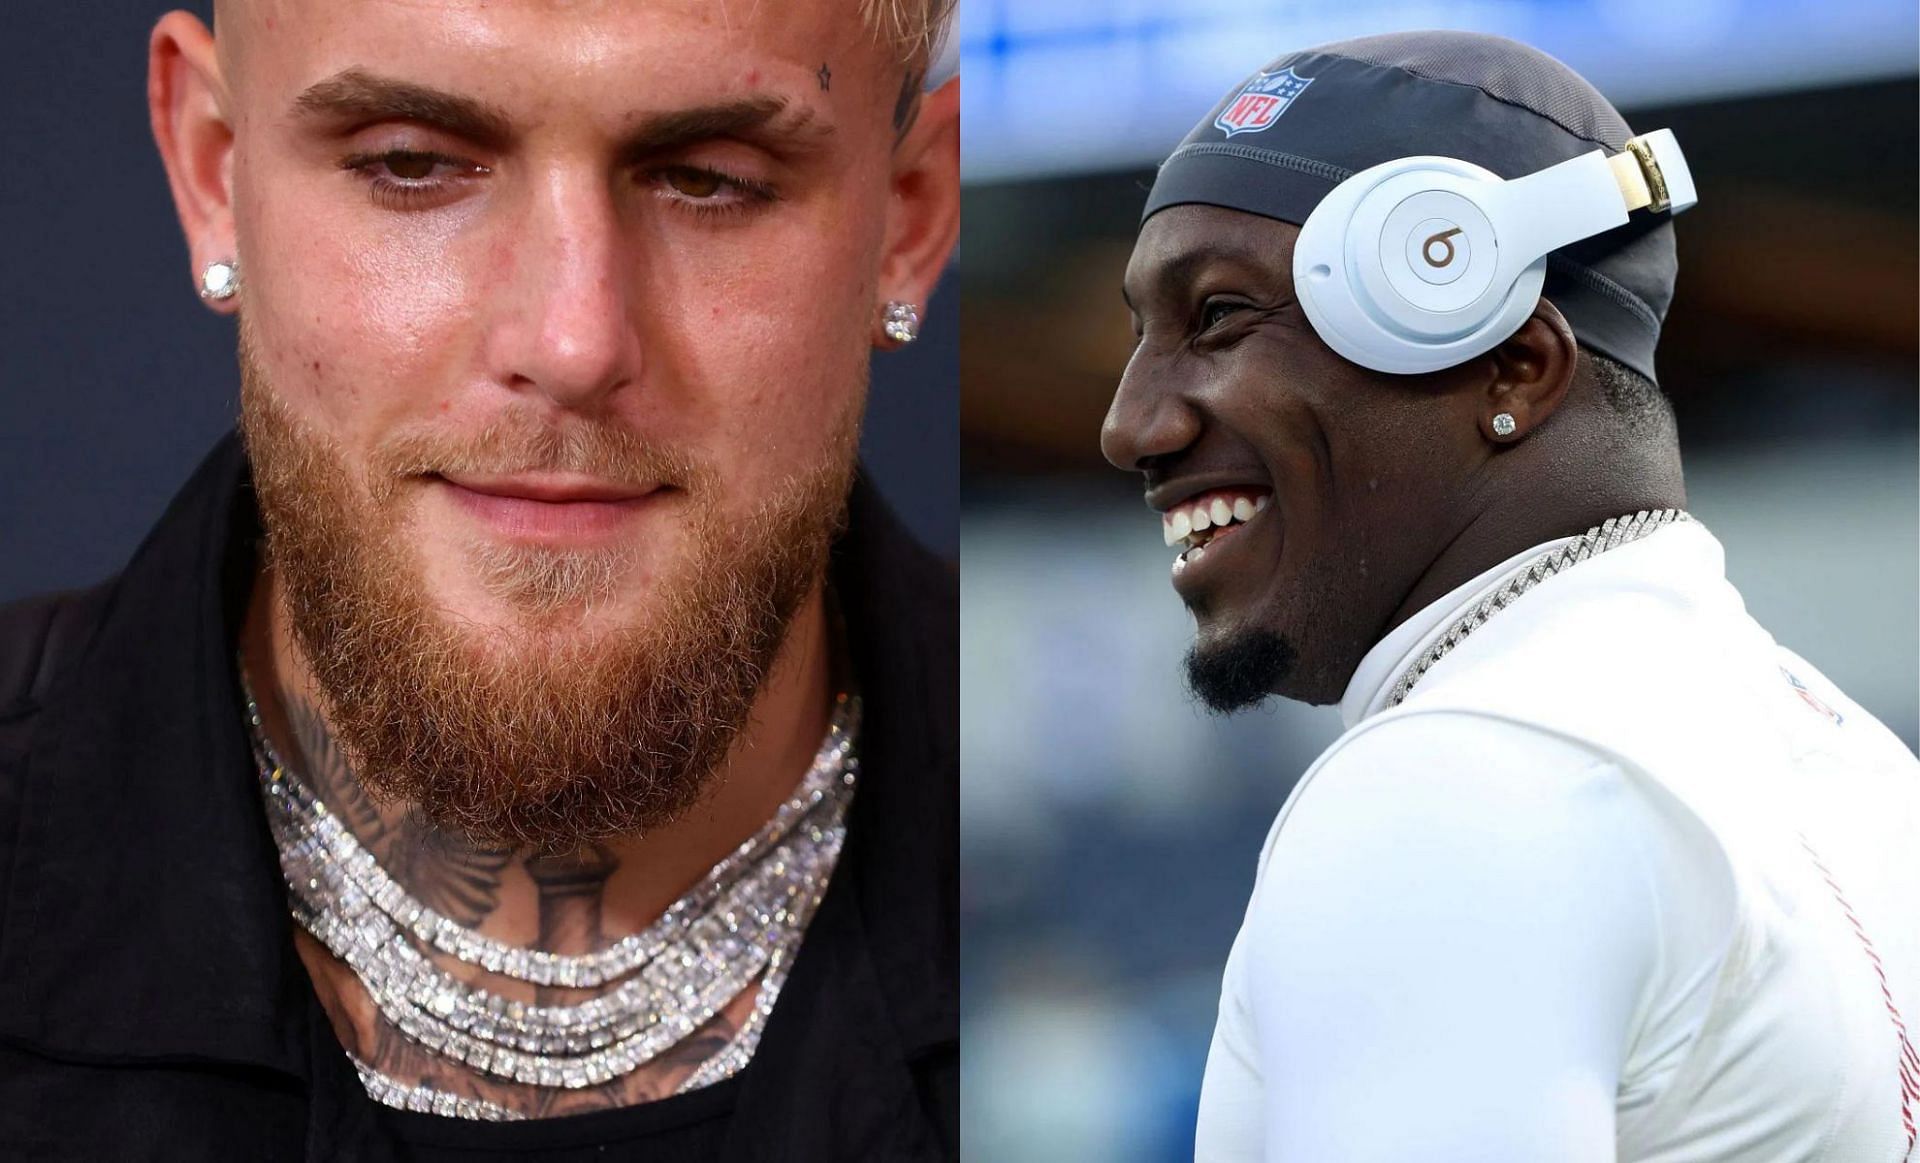 Deebo Samuel gets caught red-handed by Jake Paul for slipping into his GF